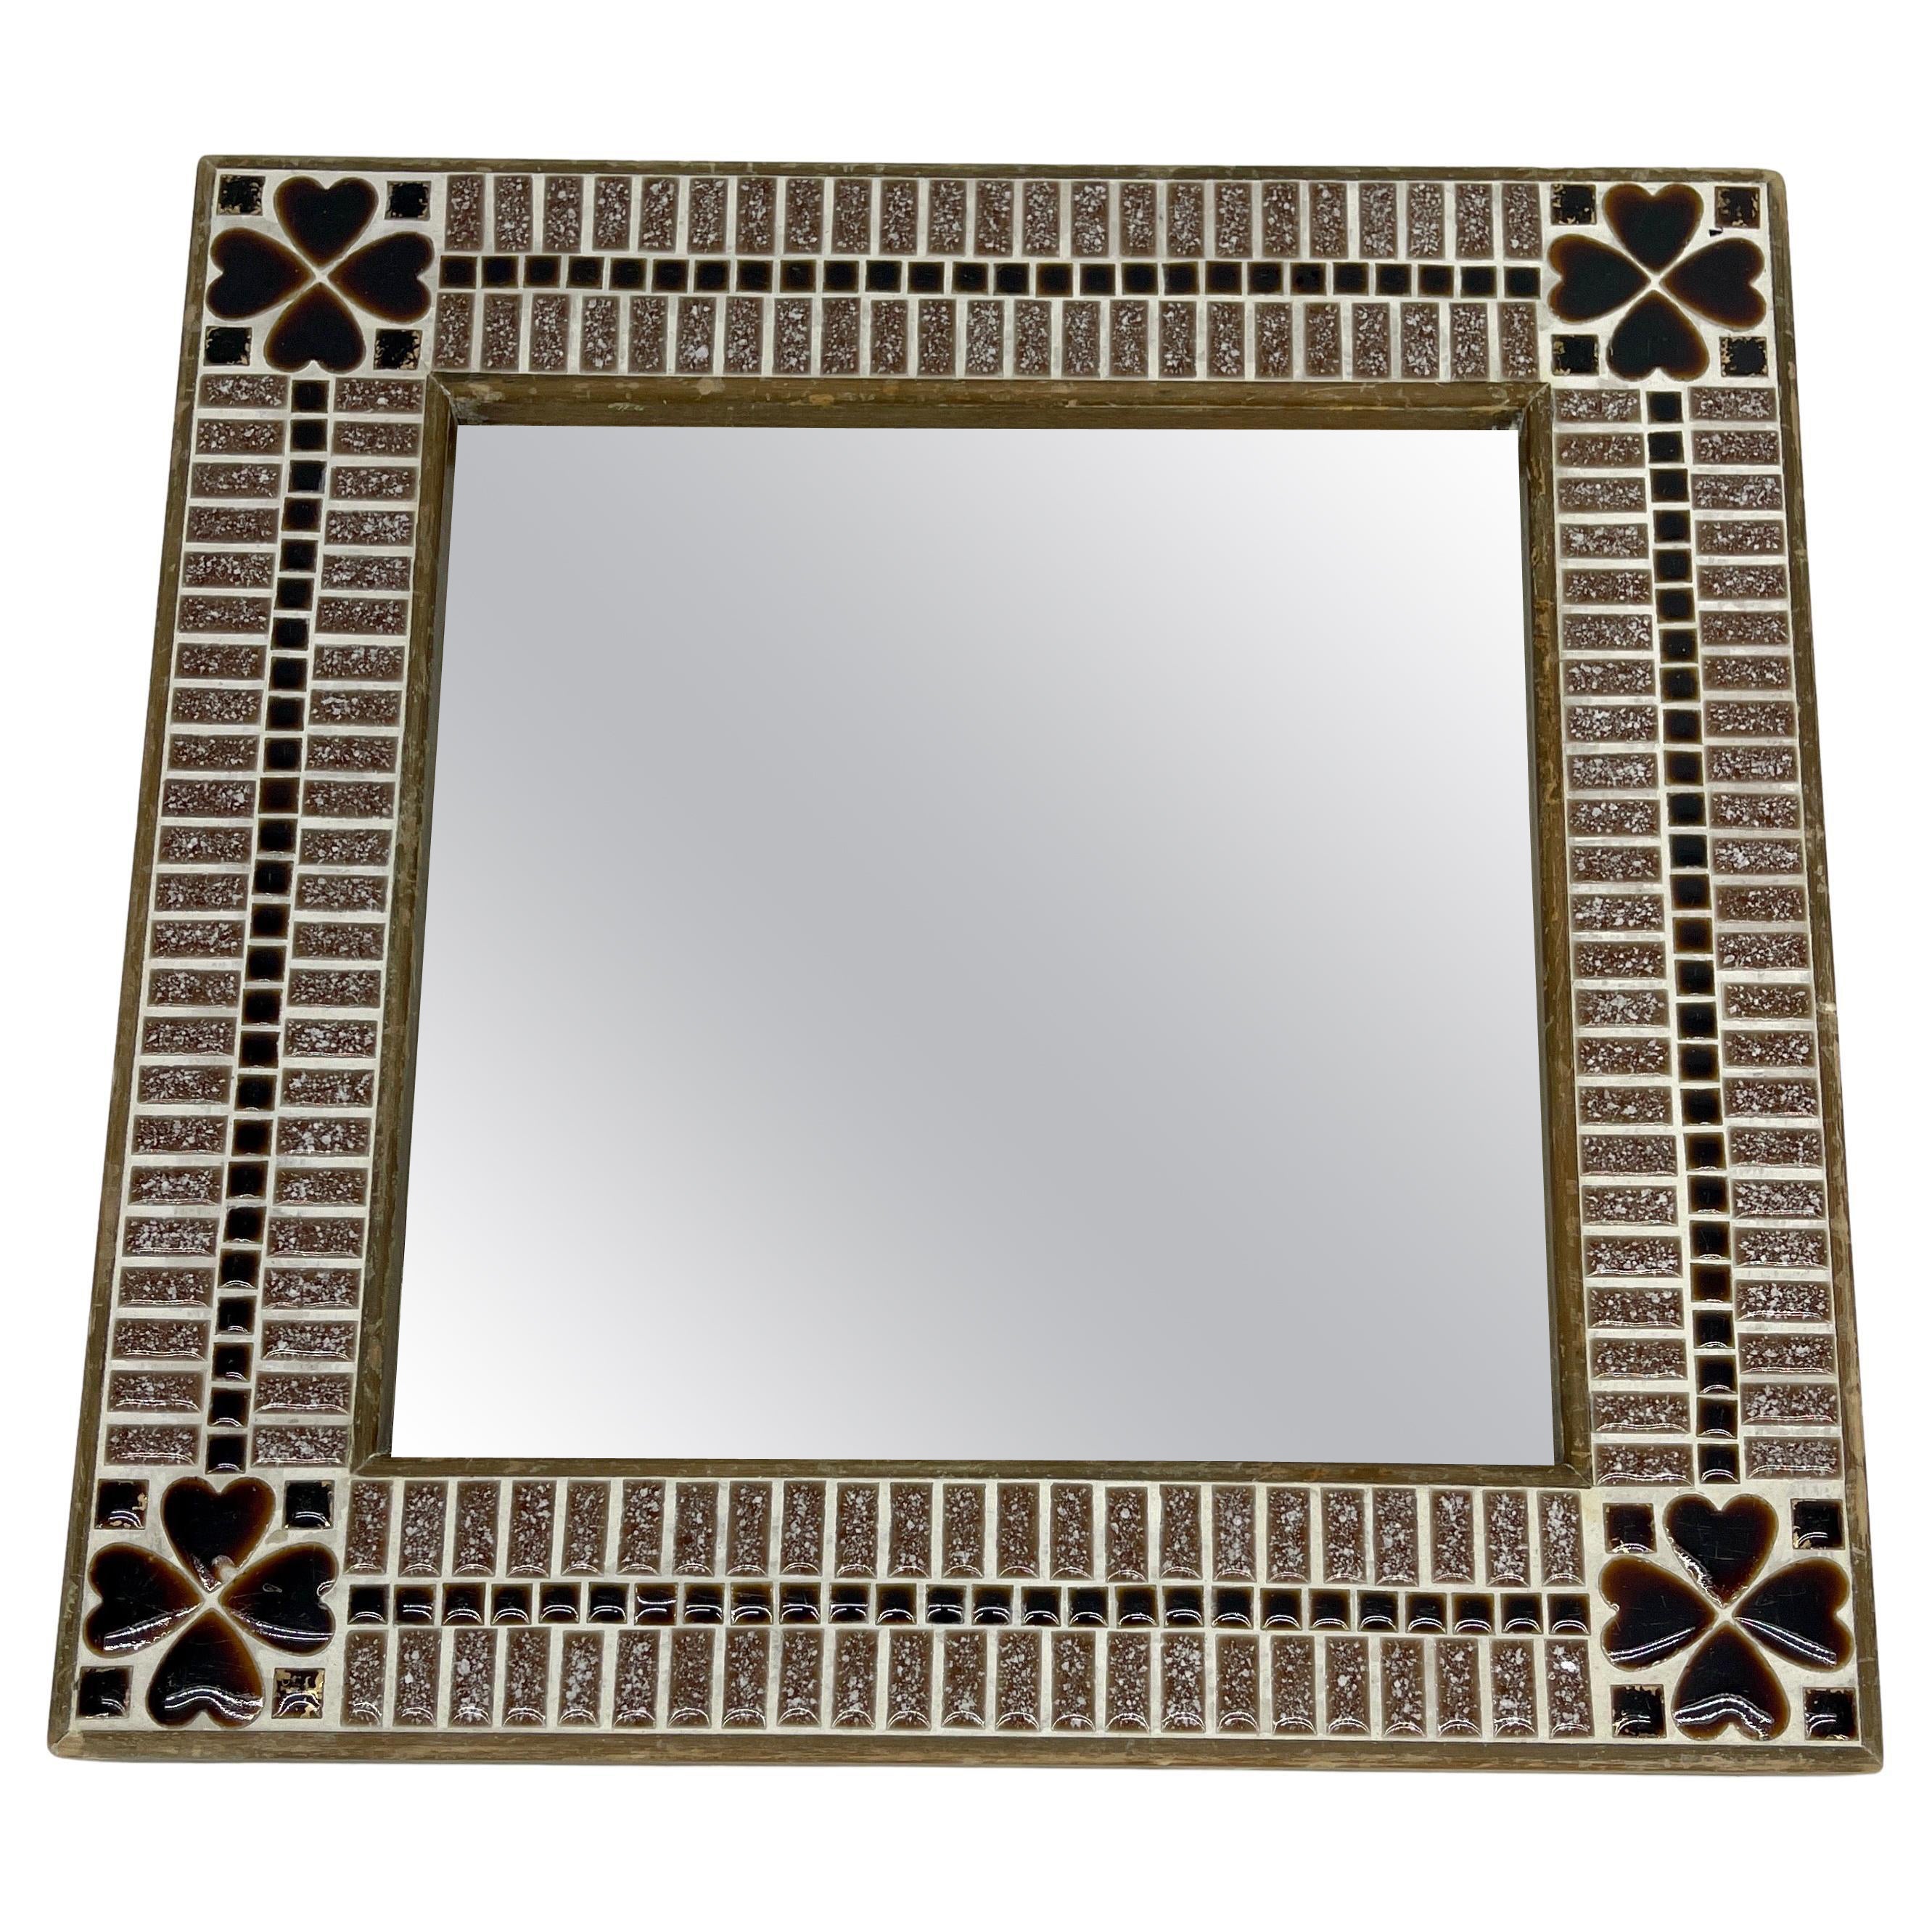 Small Square Tile Mirror with Heart Decorations For Sale